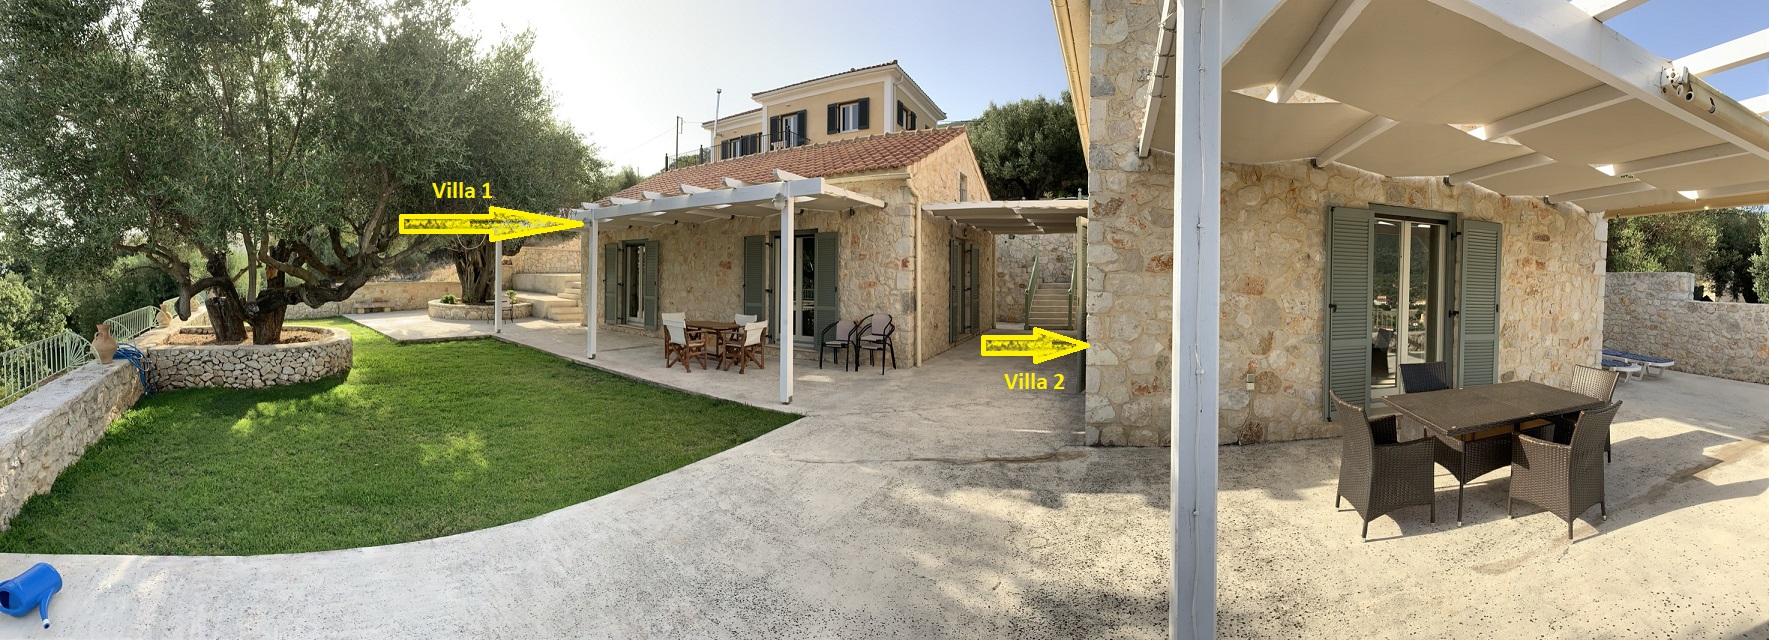 Outdoor areas of villas for rent on Ithaca Greece, Stavros